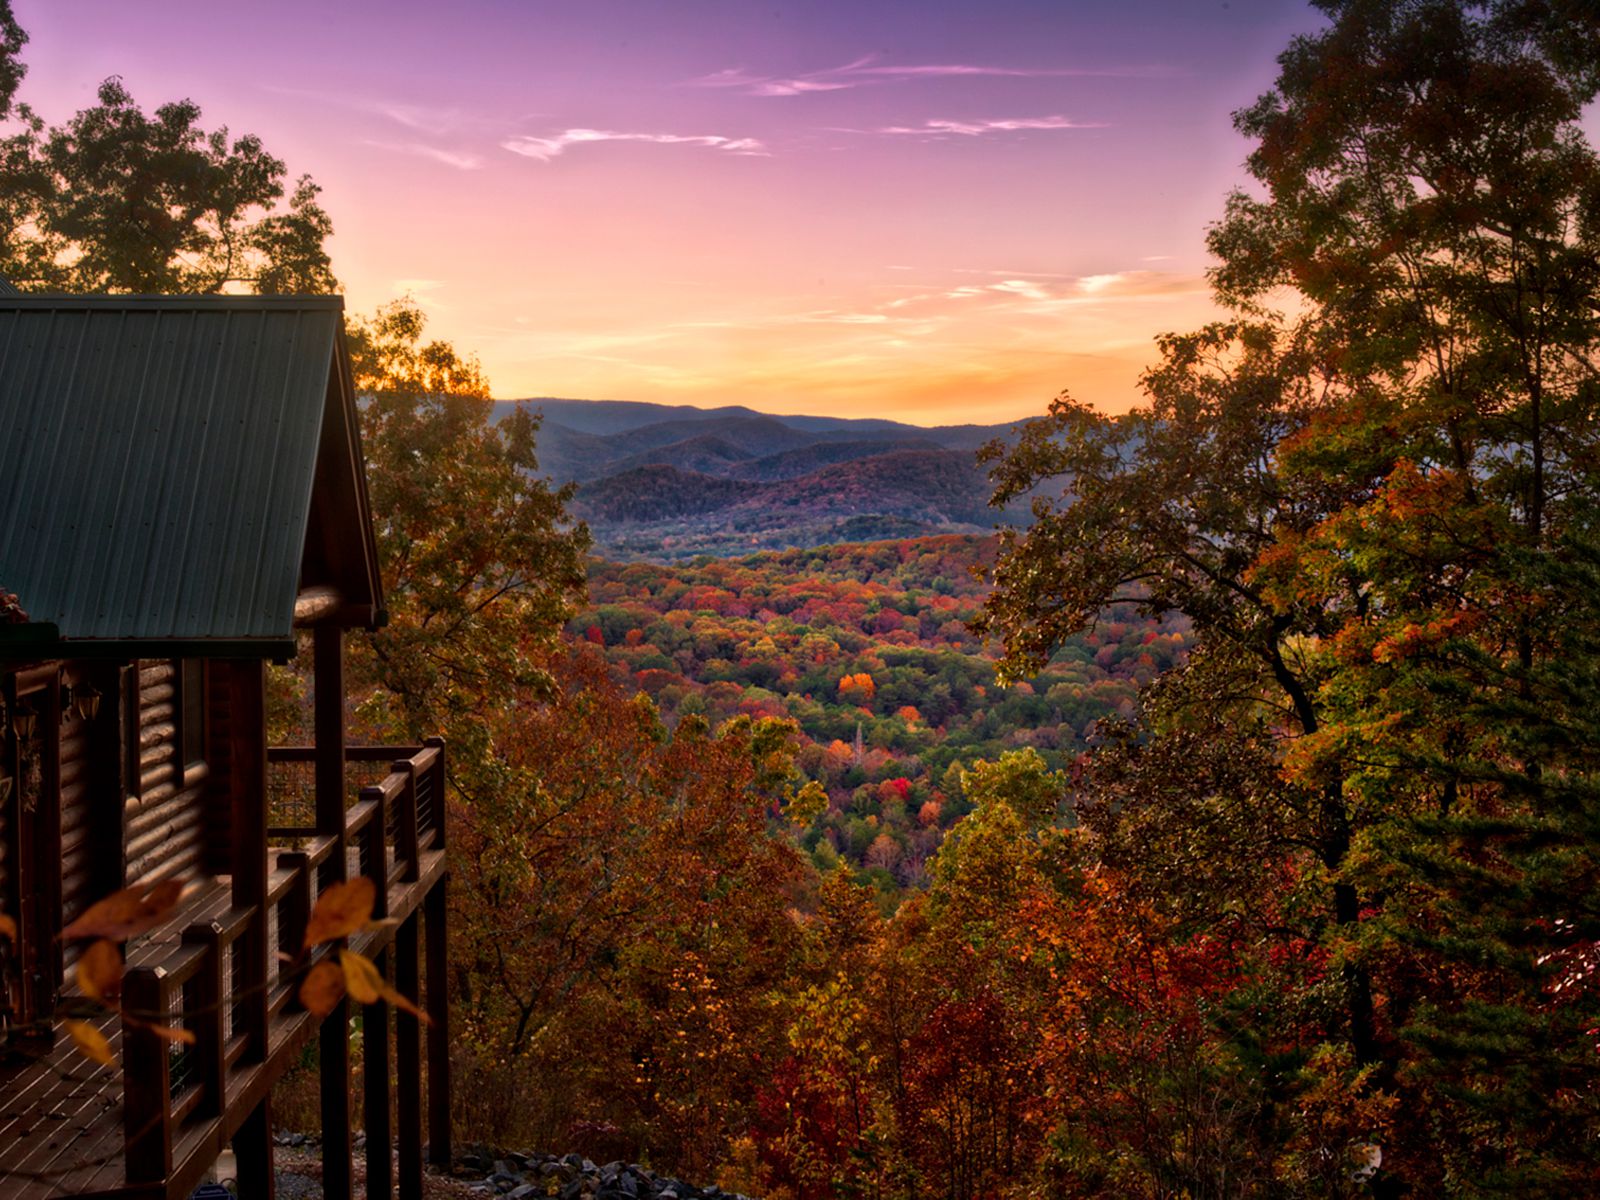 Charming Small Towns to Visit Along the Appalachian Trail